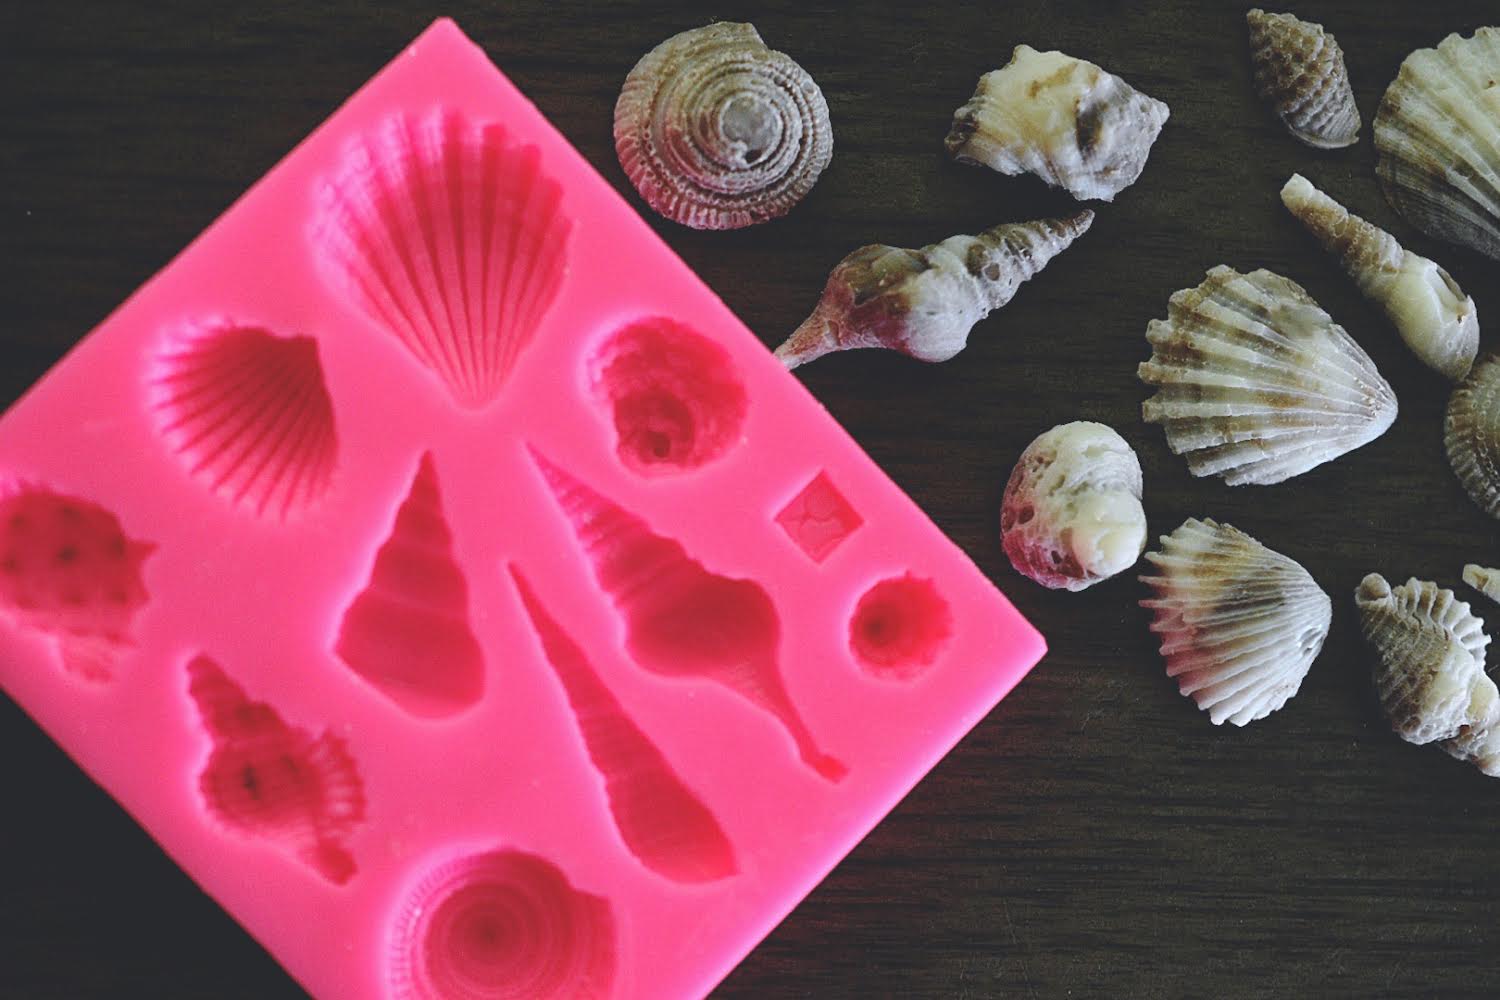 A close up view of an assortment of seashells made from soap rests next to a square soap mold on a wooden surface. The seashells are colored a cream and brown color. The mold is pink.